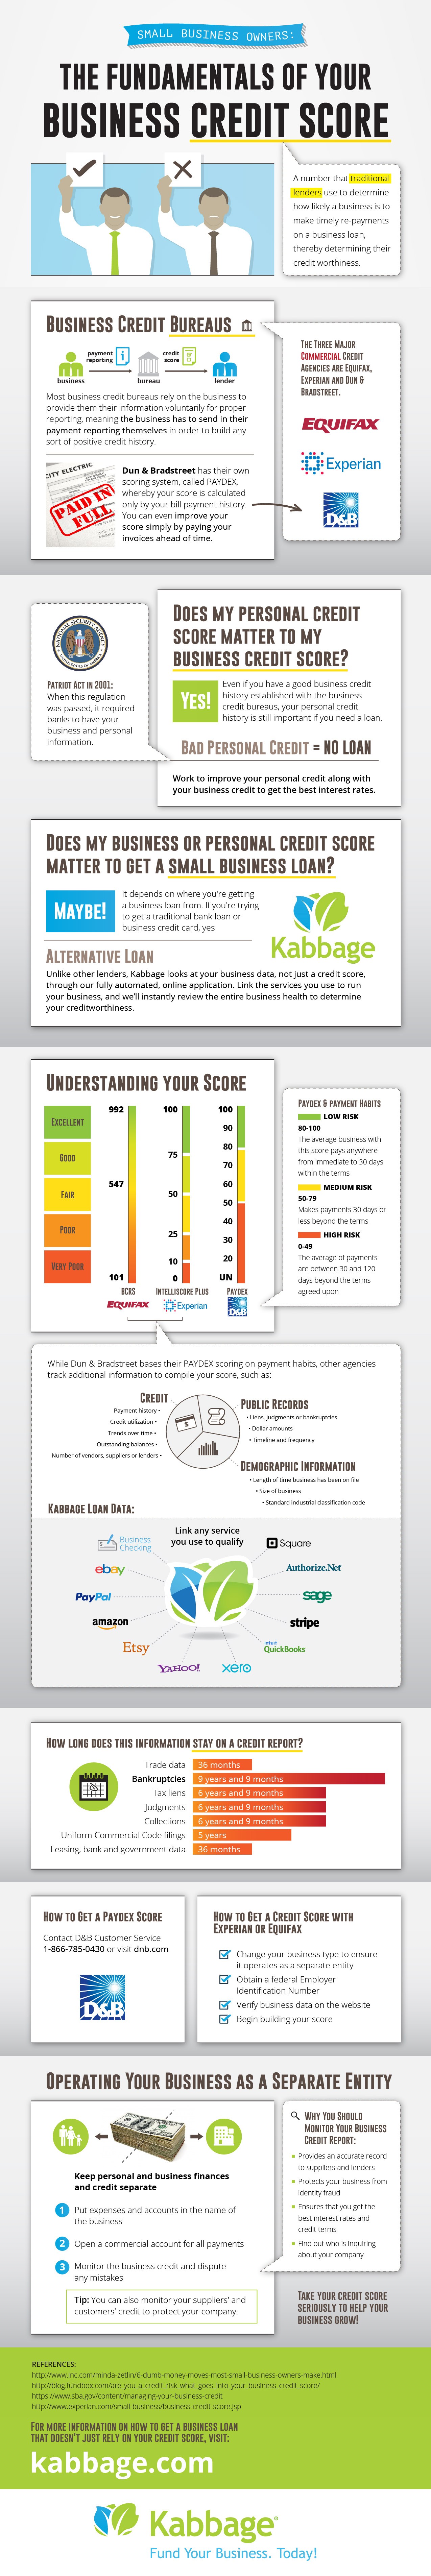 The Fundamentals of Your Business Credit Score